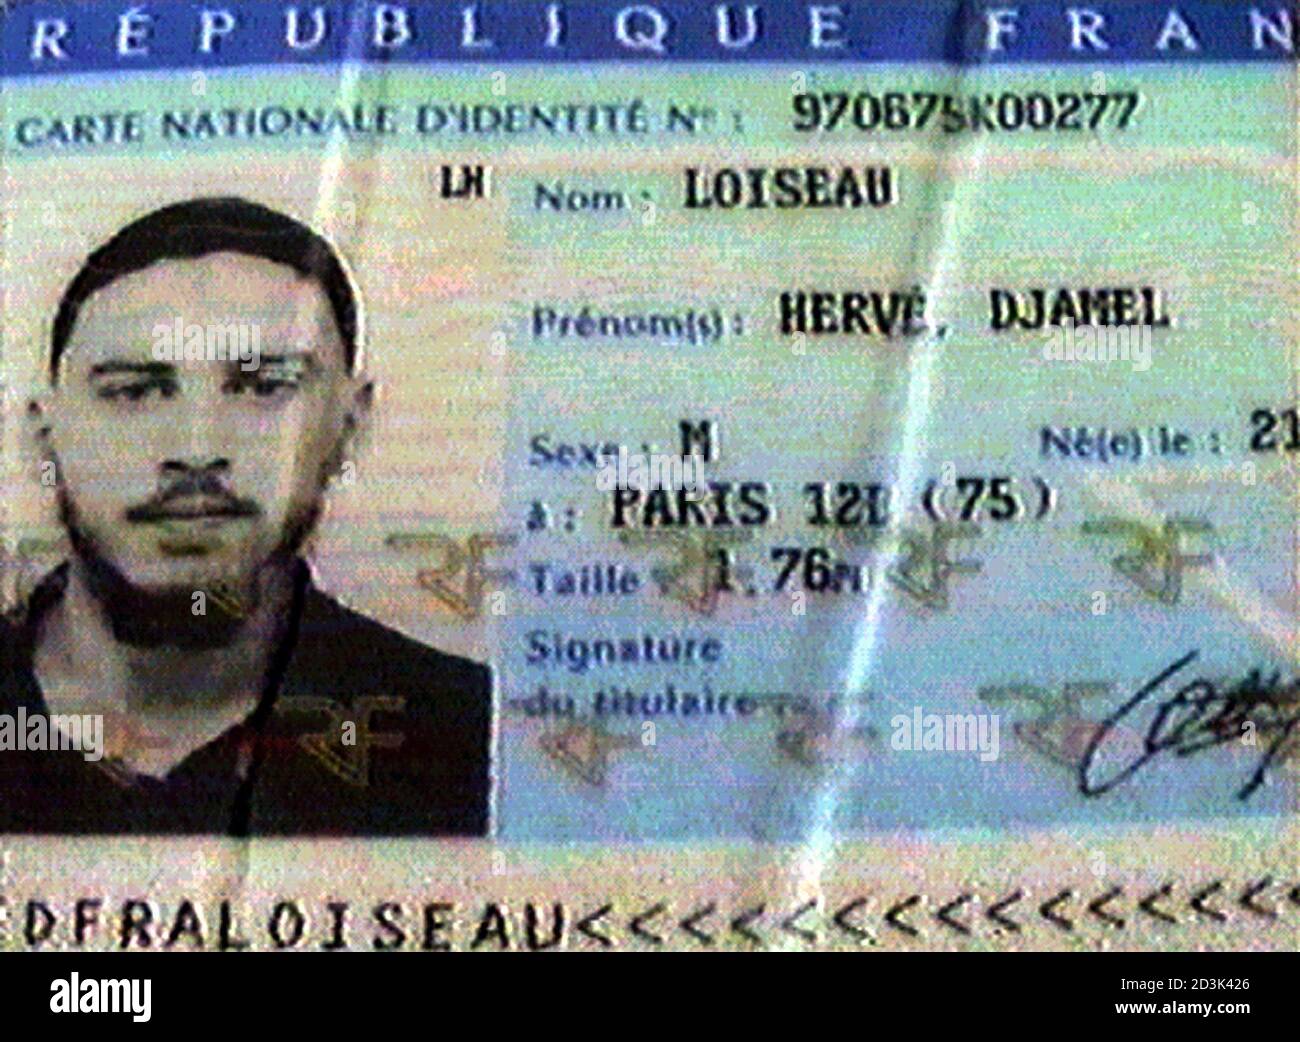 VIDEO IMAGE 24DEC01 - The identity card of Herve Djamel Loiseau is pictured  in Parachinar, Pakistan on December 24, 2001. A frozen body, carrying  French documents, was found in the mountains